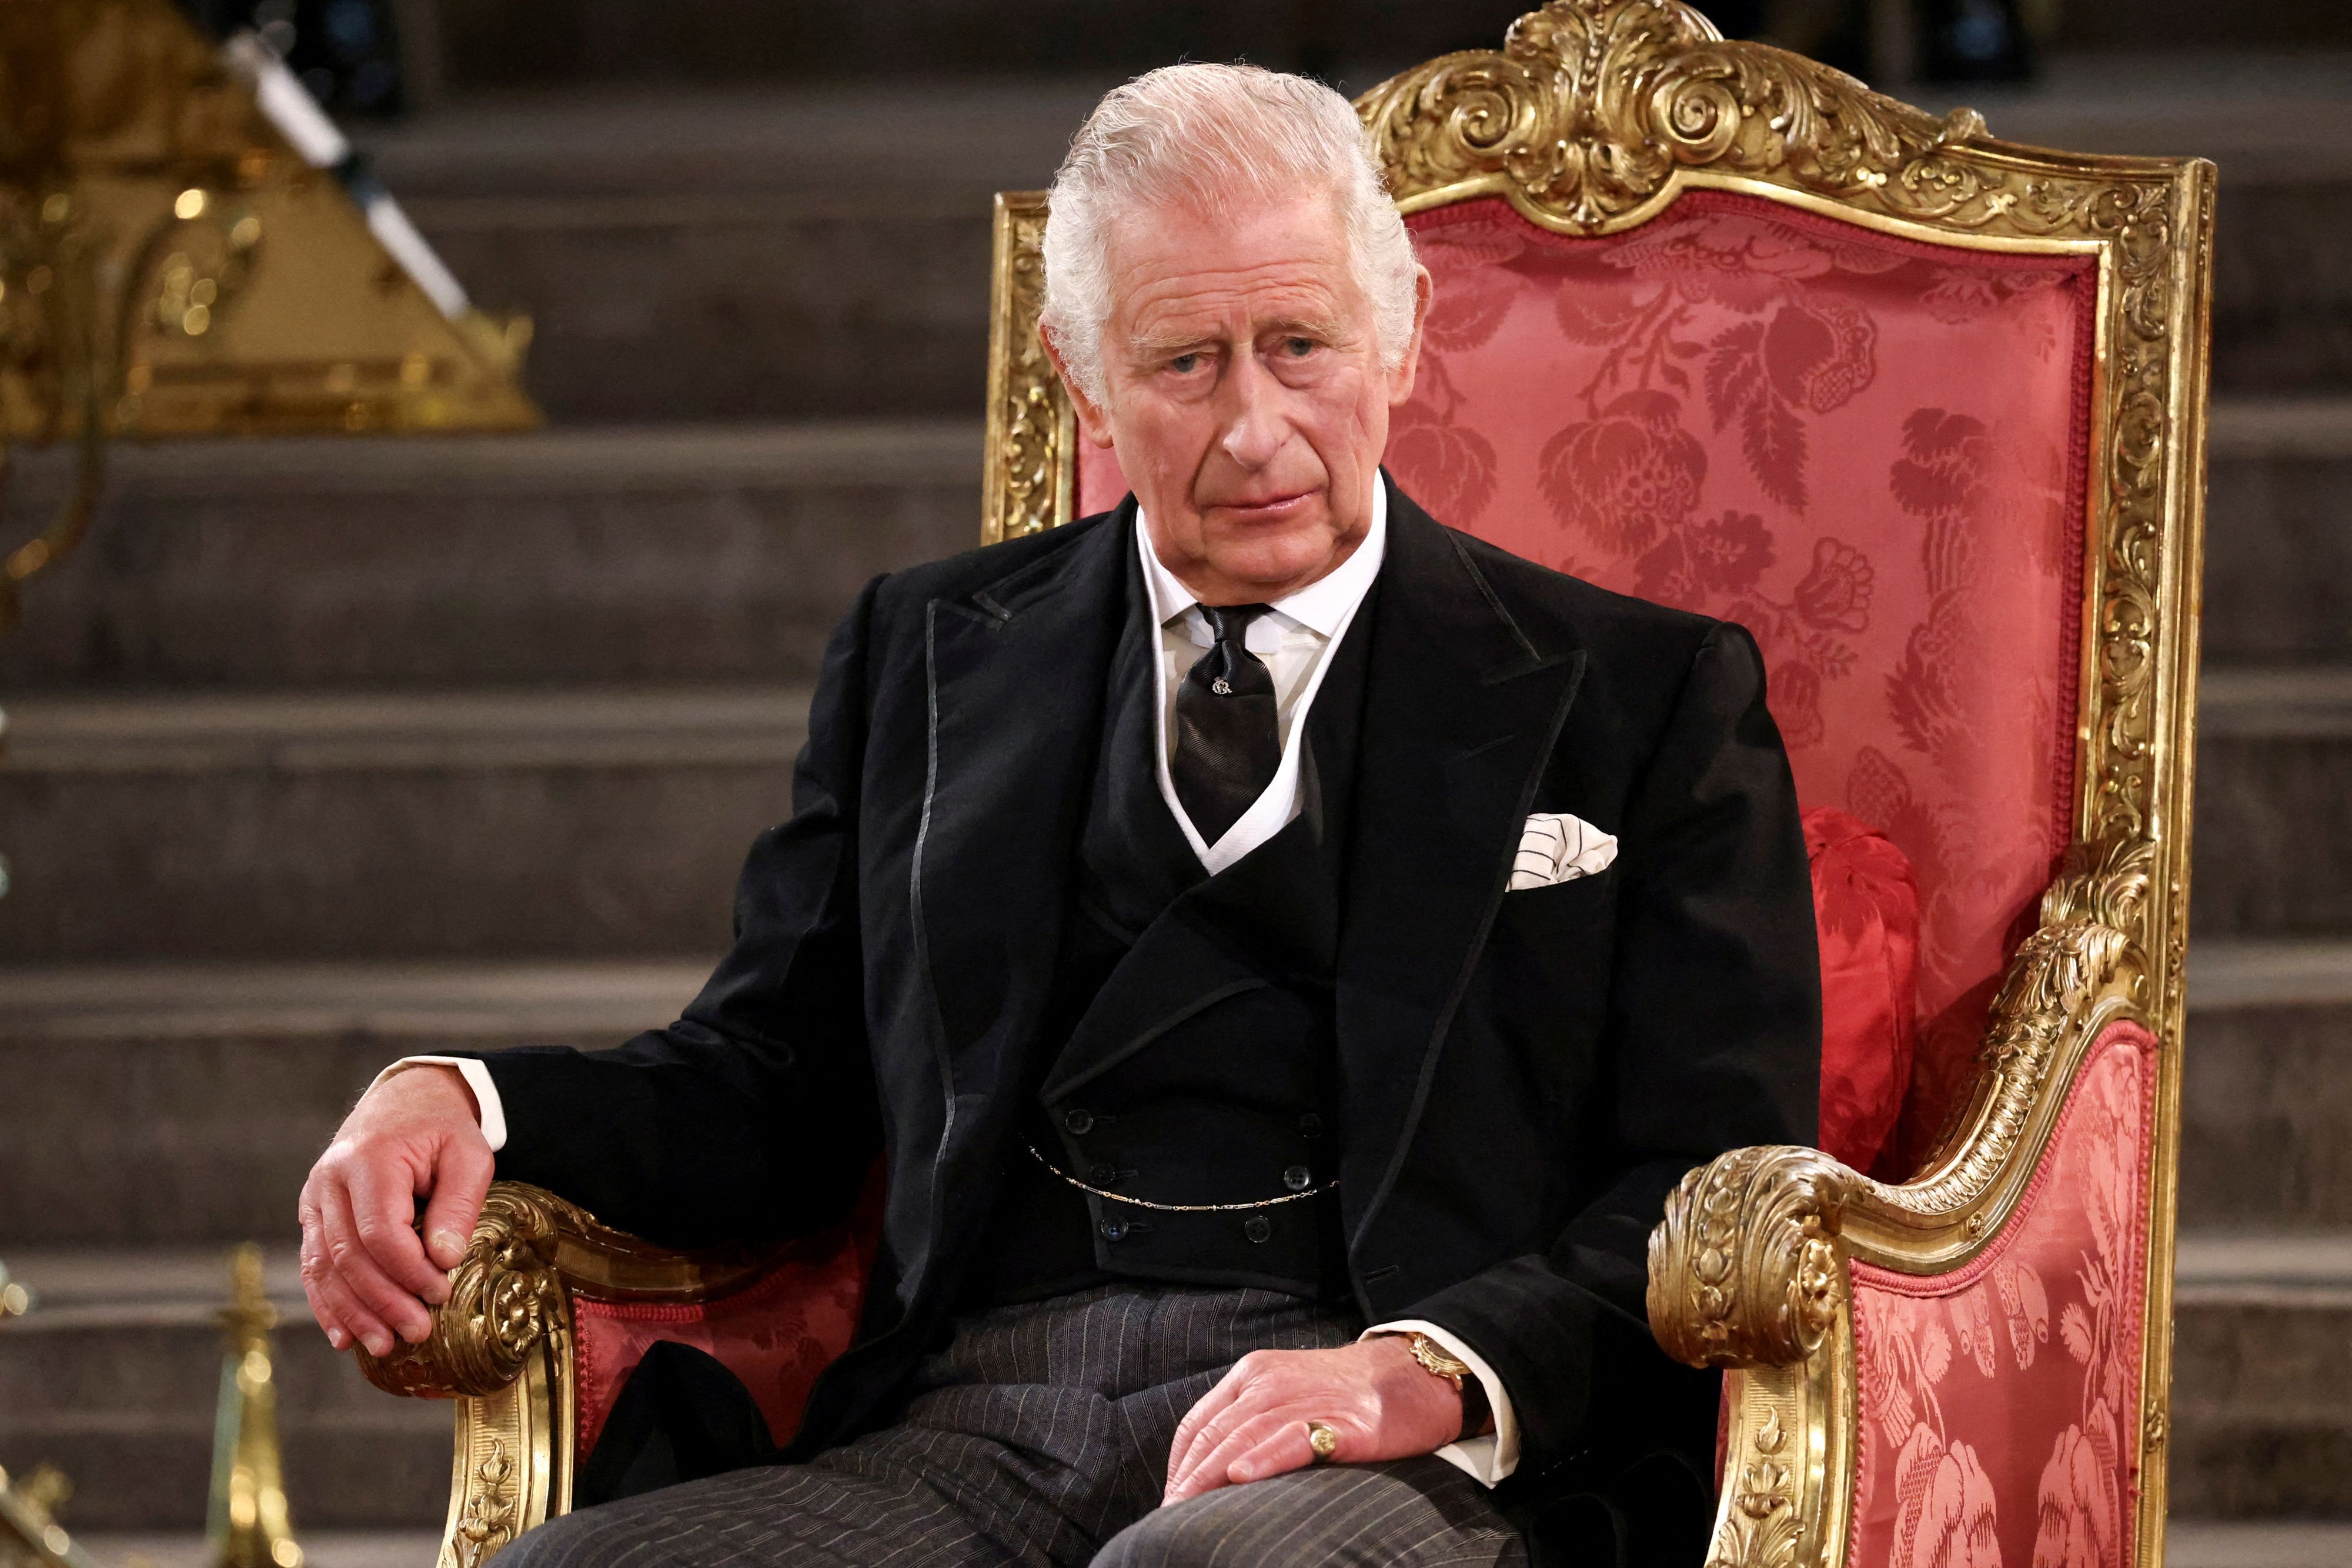 King Charles III attends the presentation of Addresses by both Houses of Parliament in Westminster Hall on September 12, 2022 | Source: Getty Images